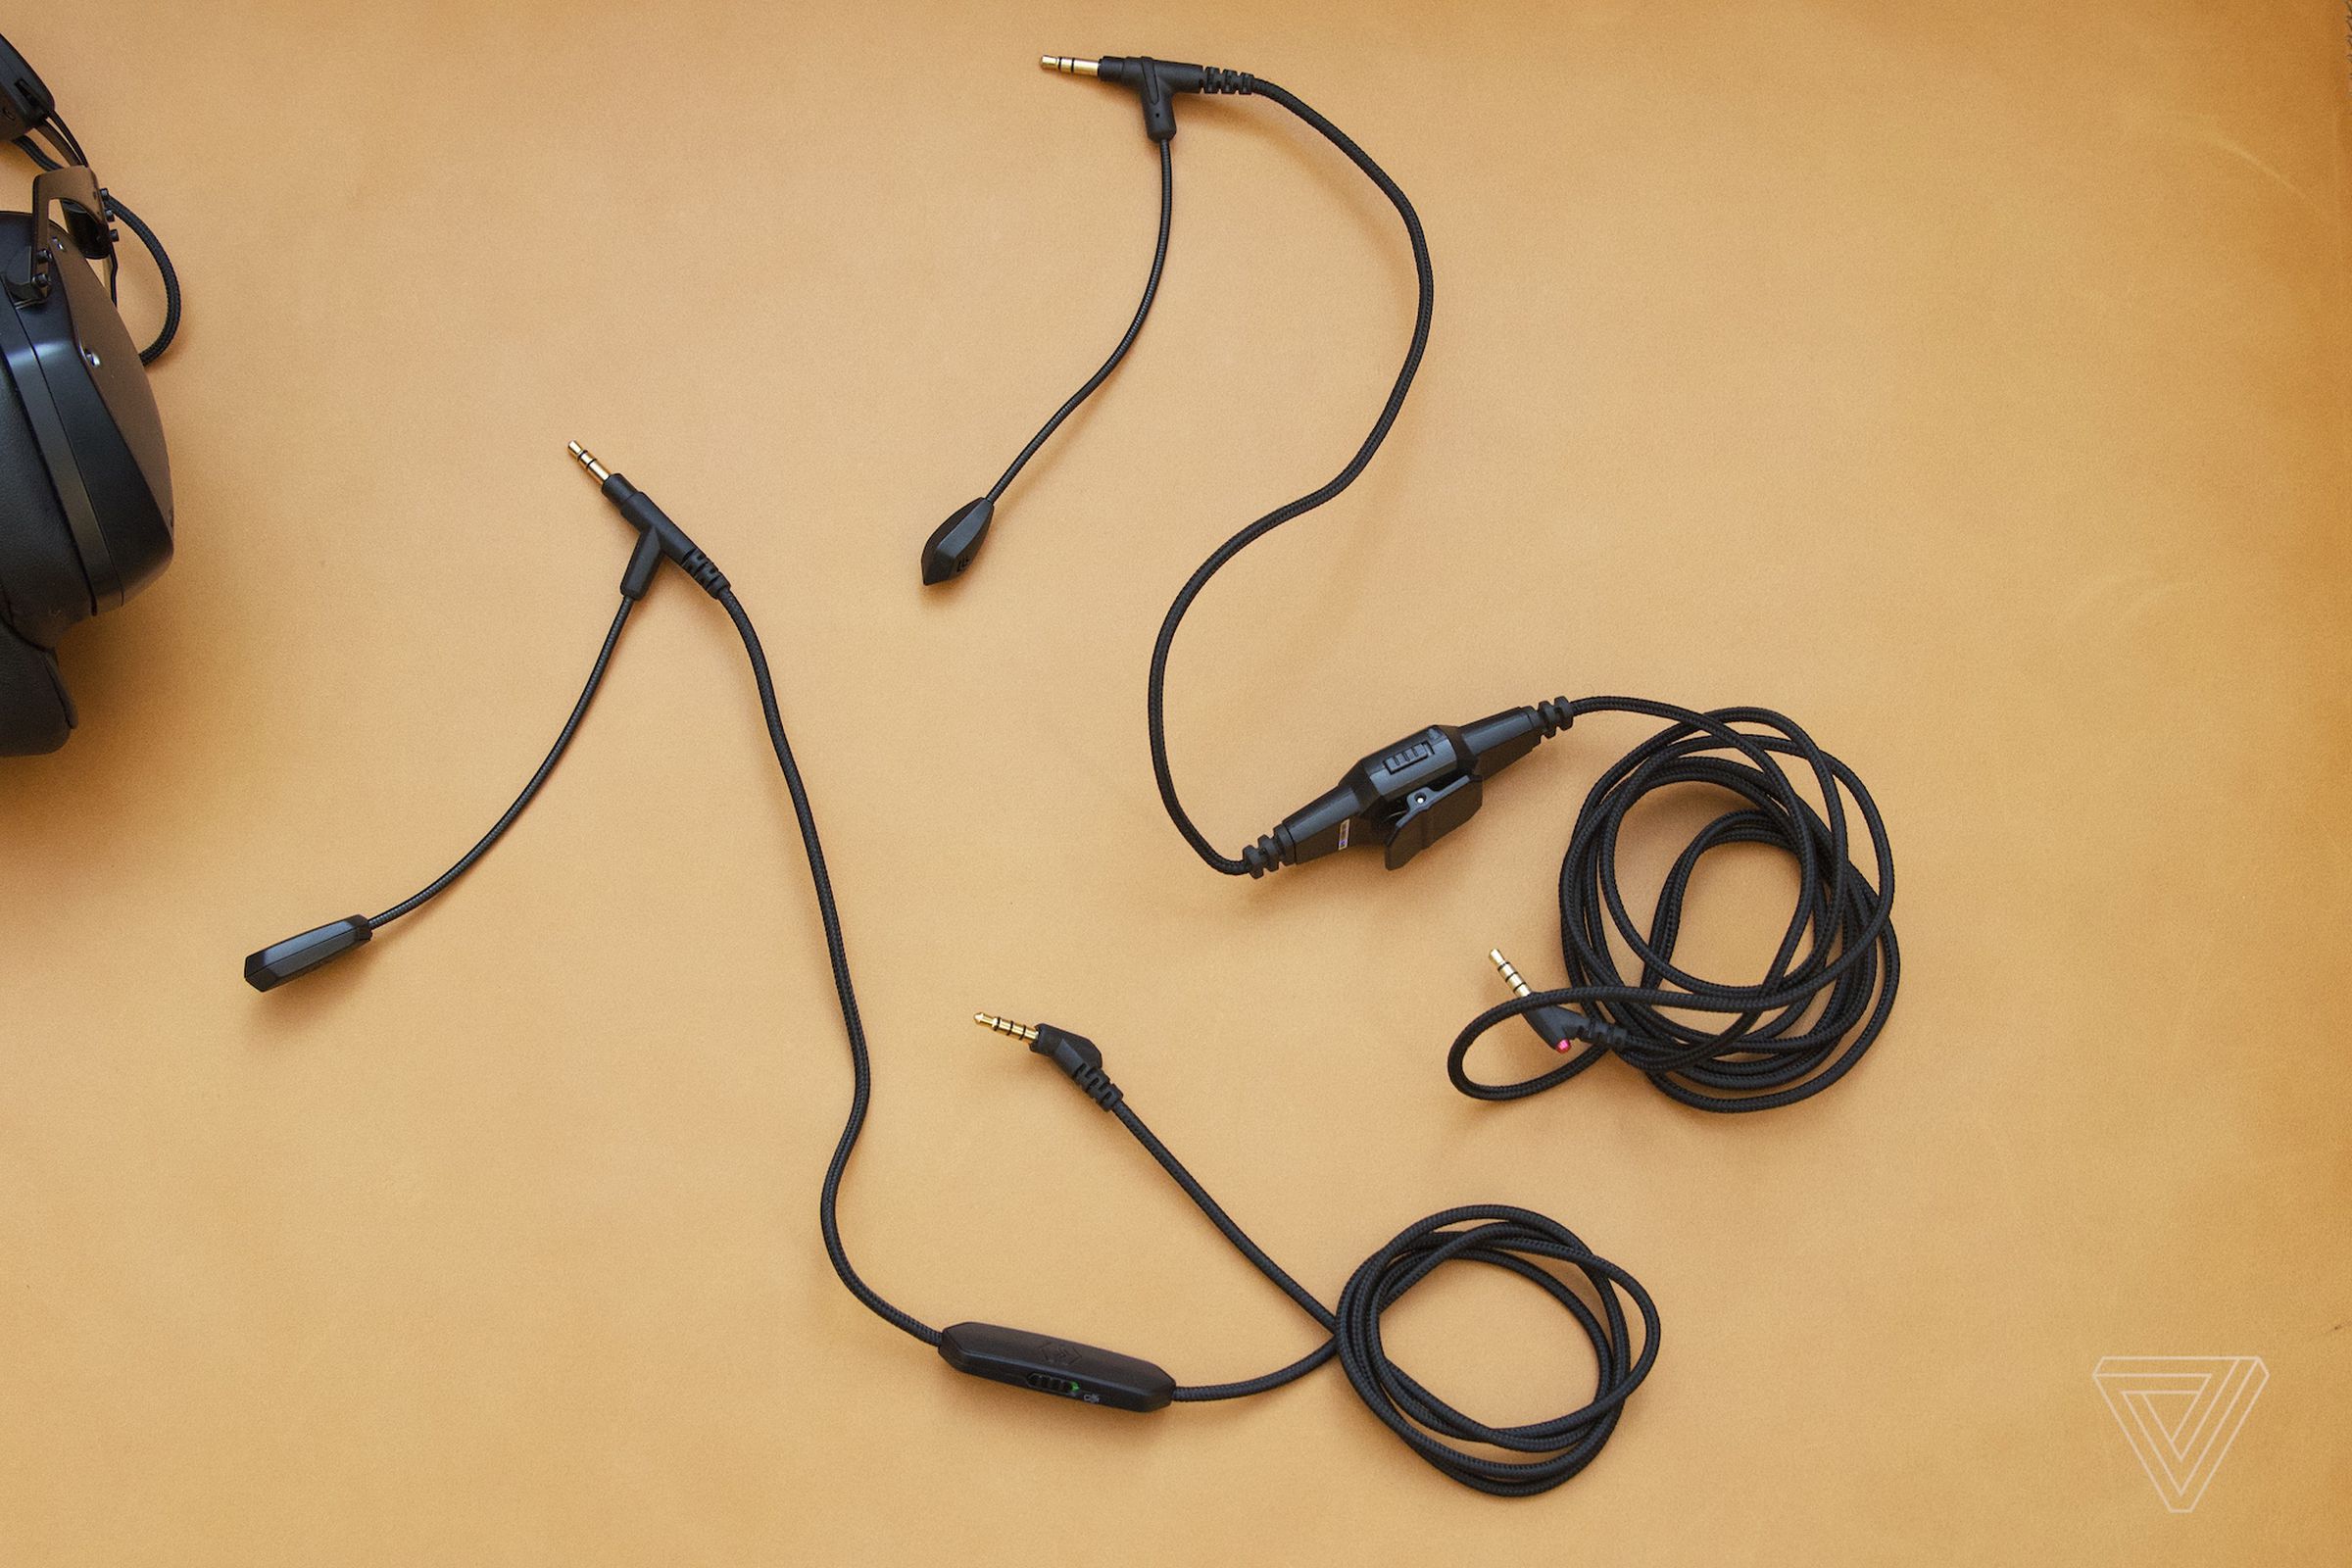 The BoomPro X can be plugged into any set of wireless headphones that accepts a 3.5mm cable.